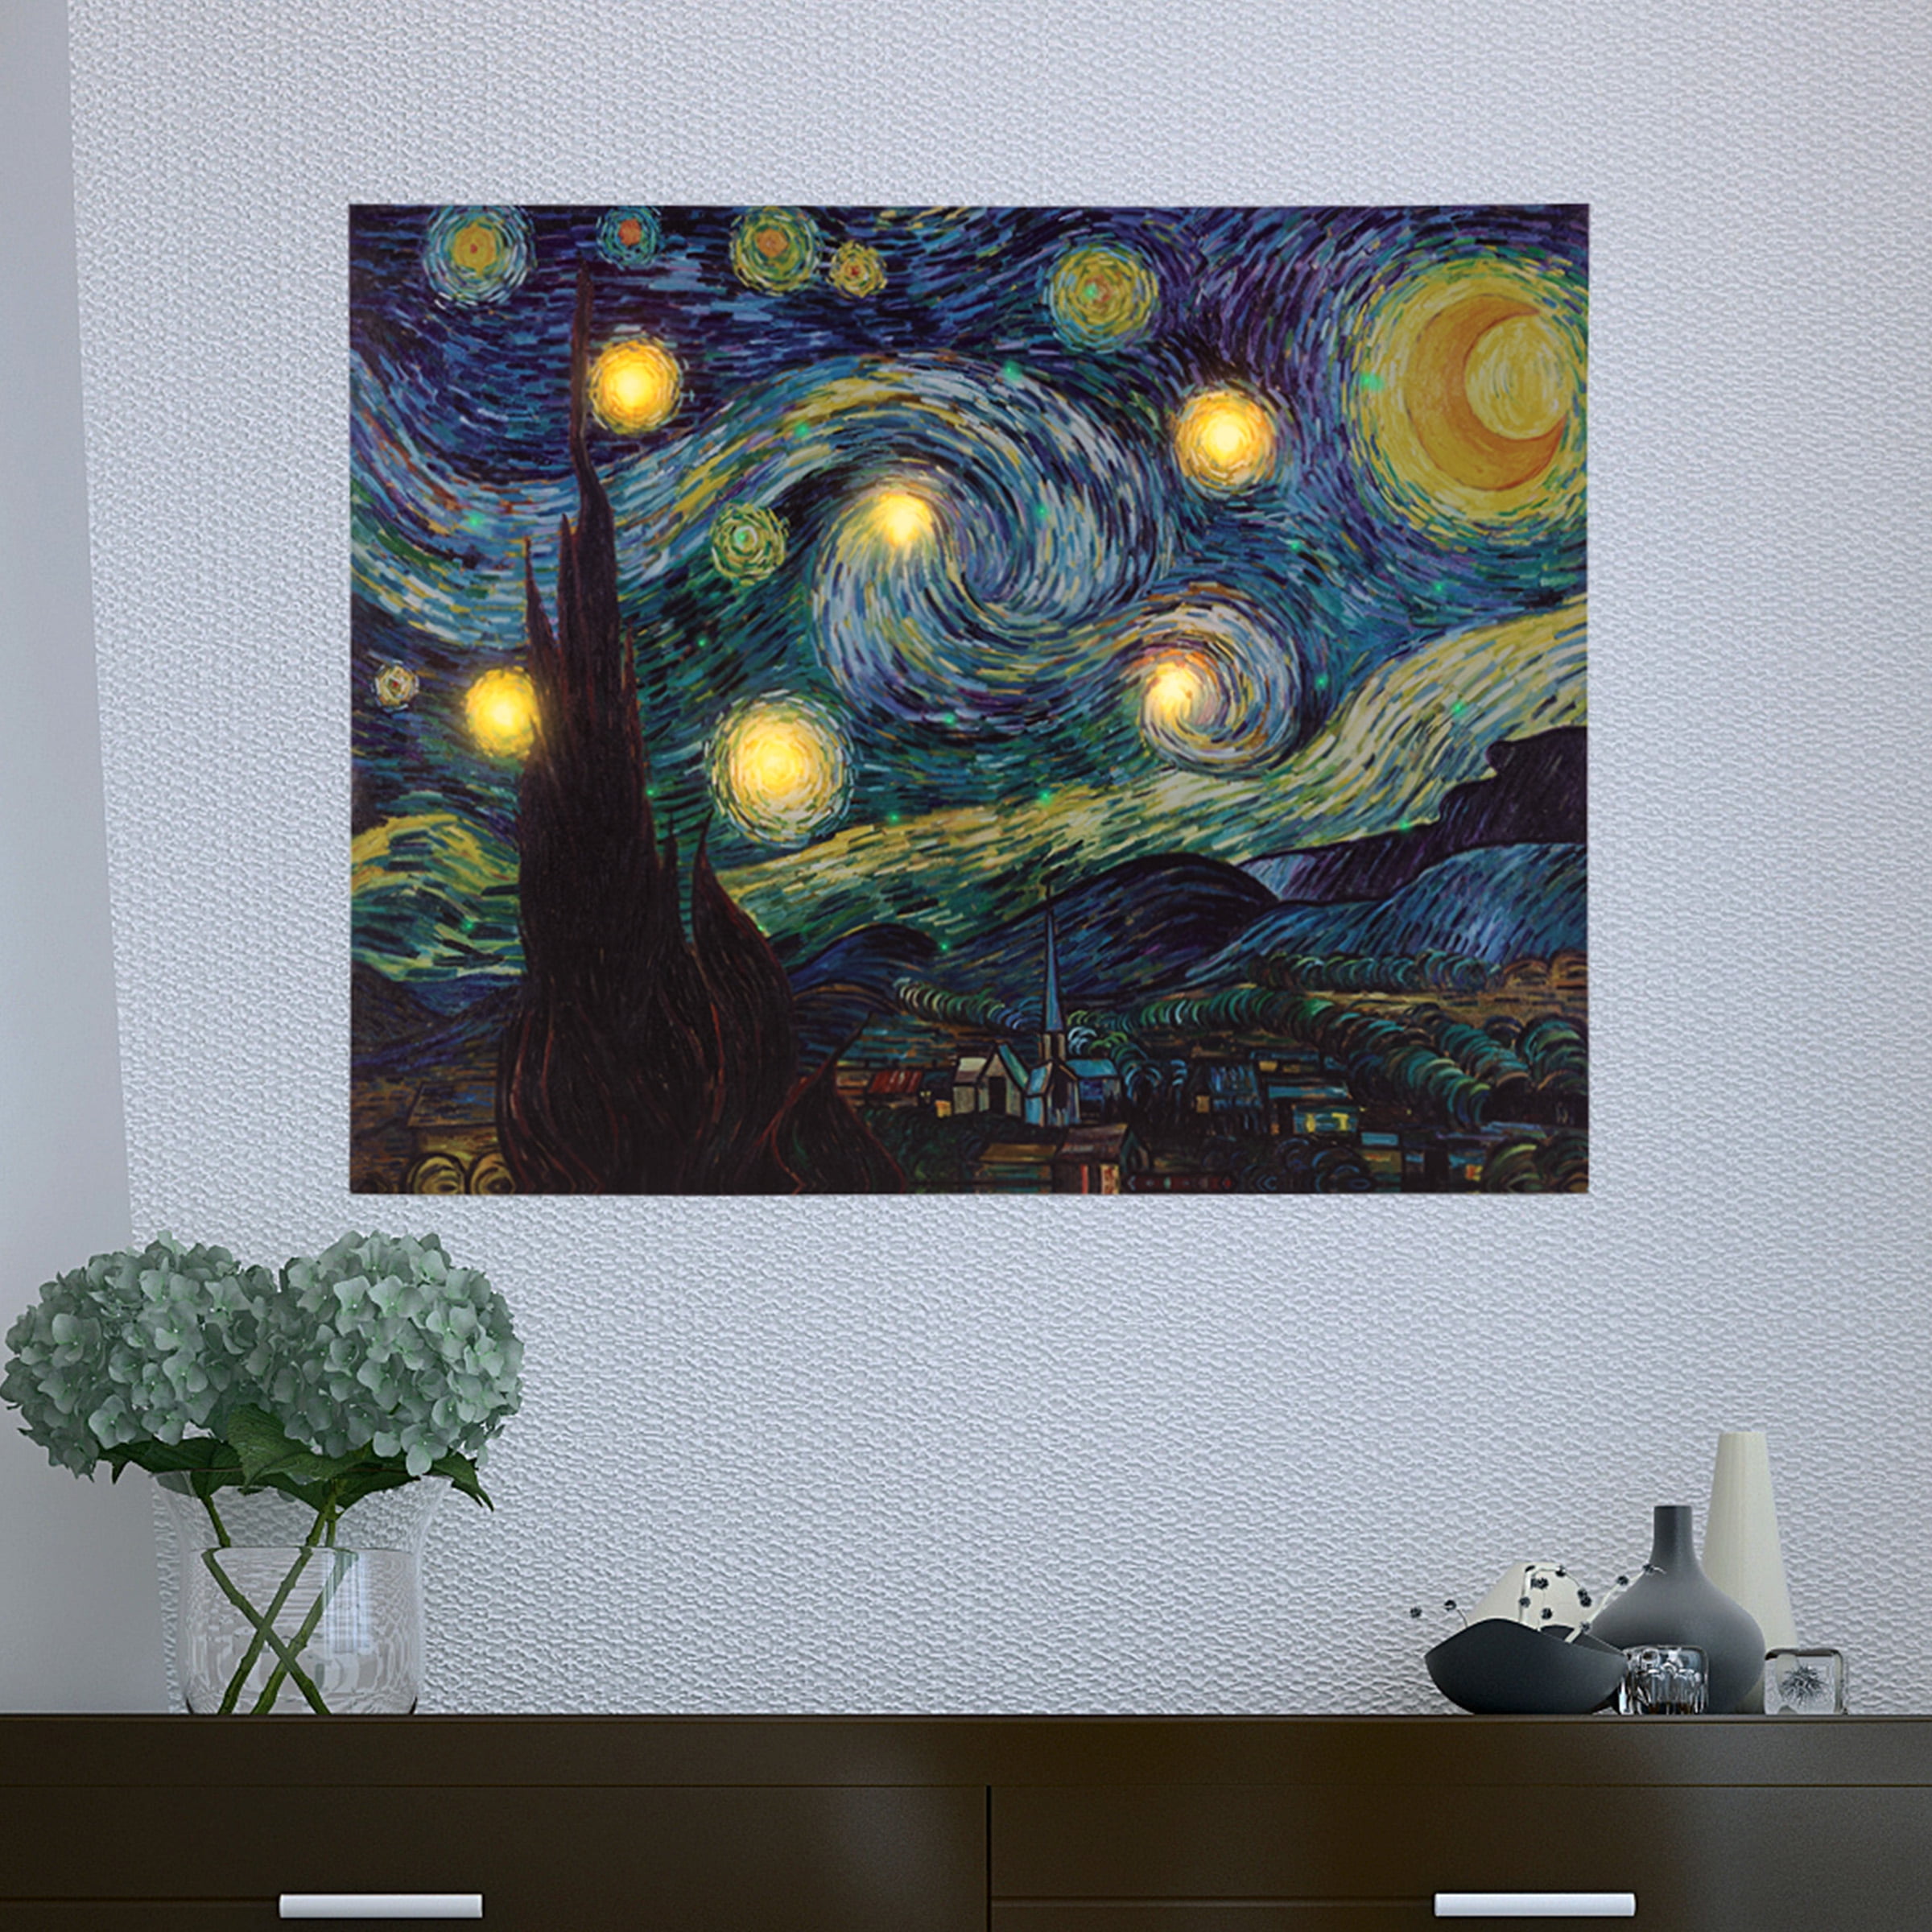 Painting to Gogh - Enjoy a Paint Night at Home